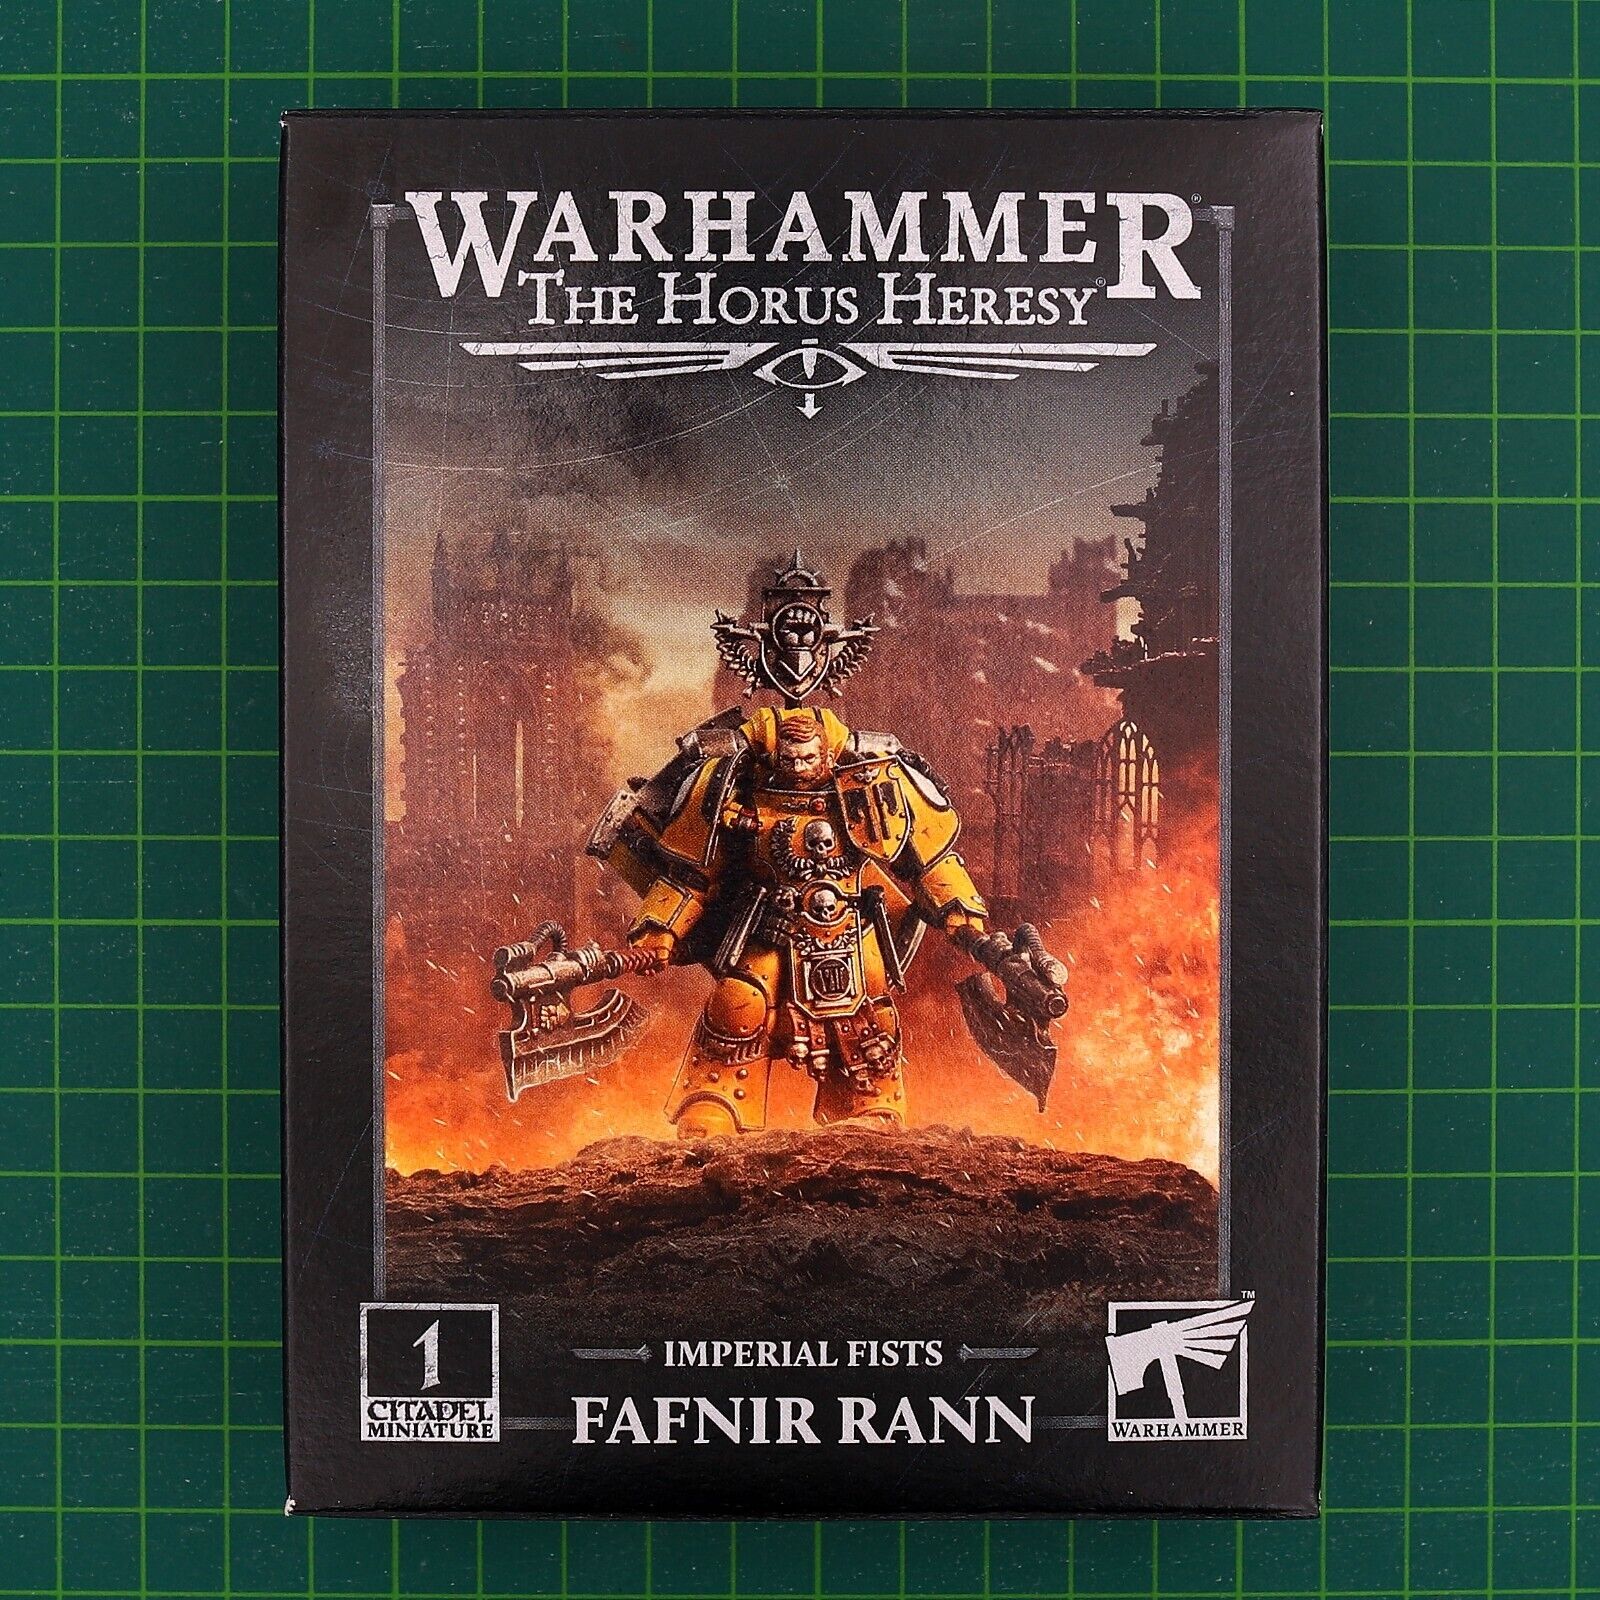 Imperial Fists: Fafnir Rann (31-21) The Horus Heresy-Age of Darkness